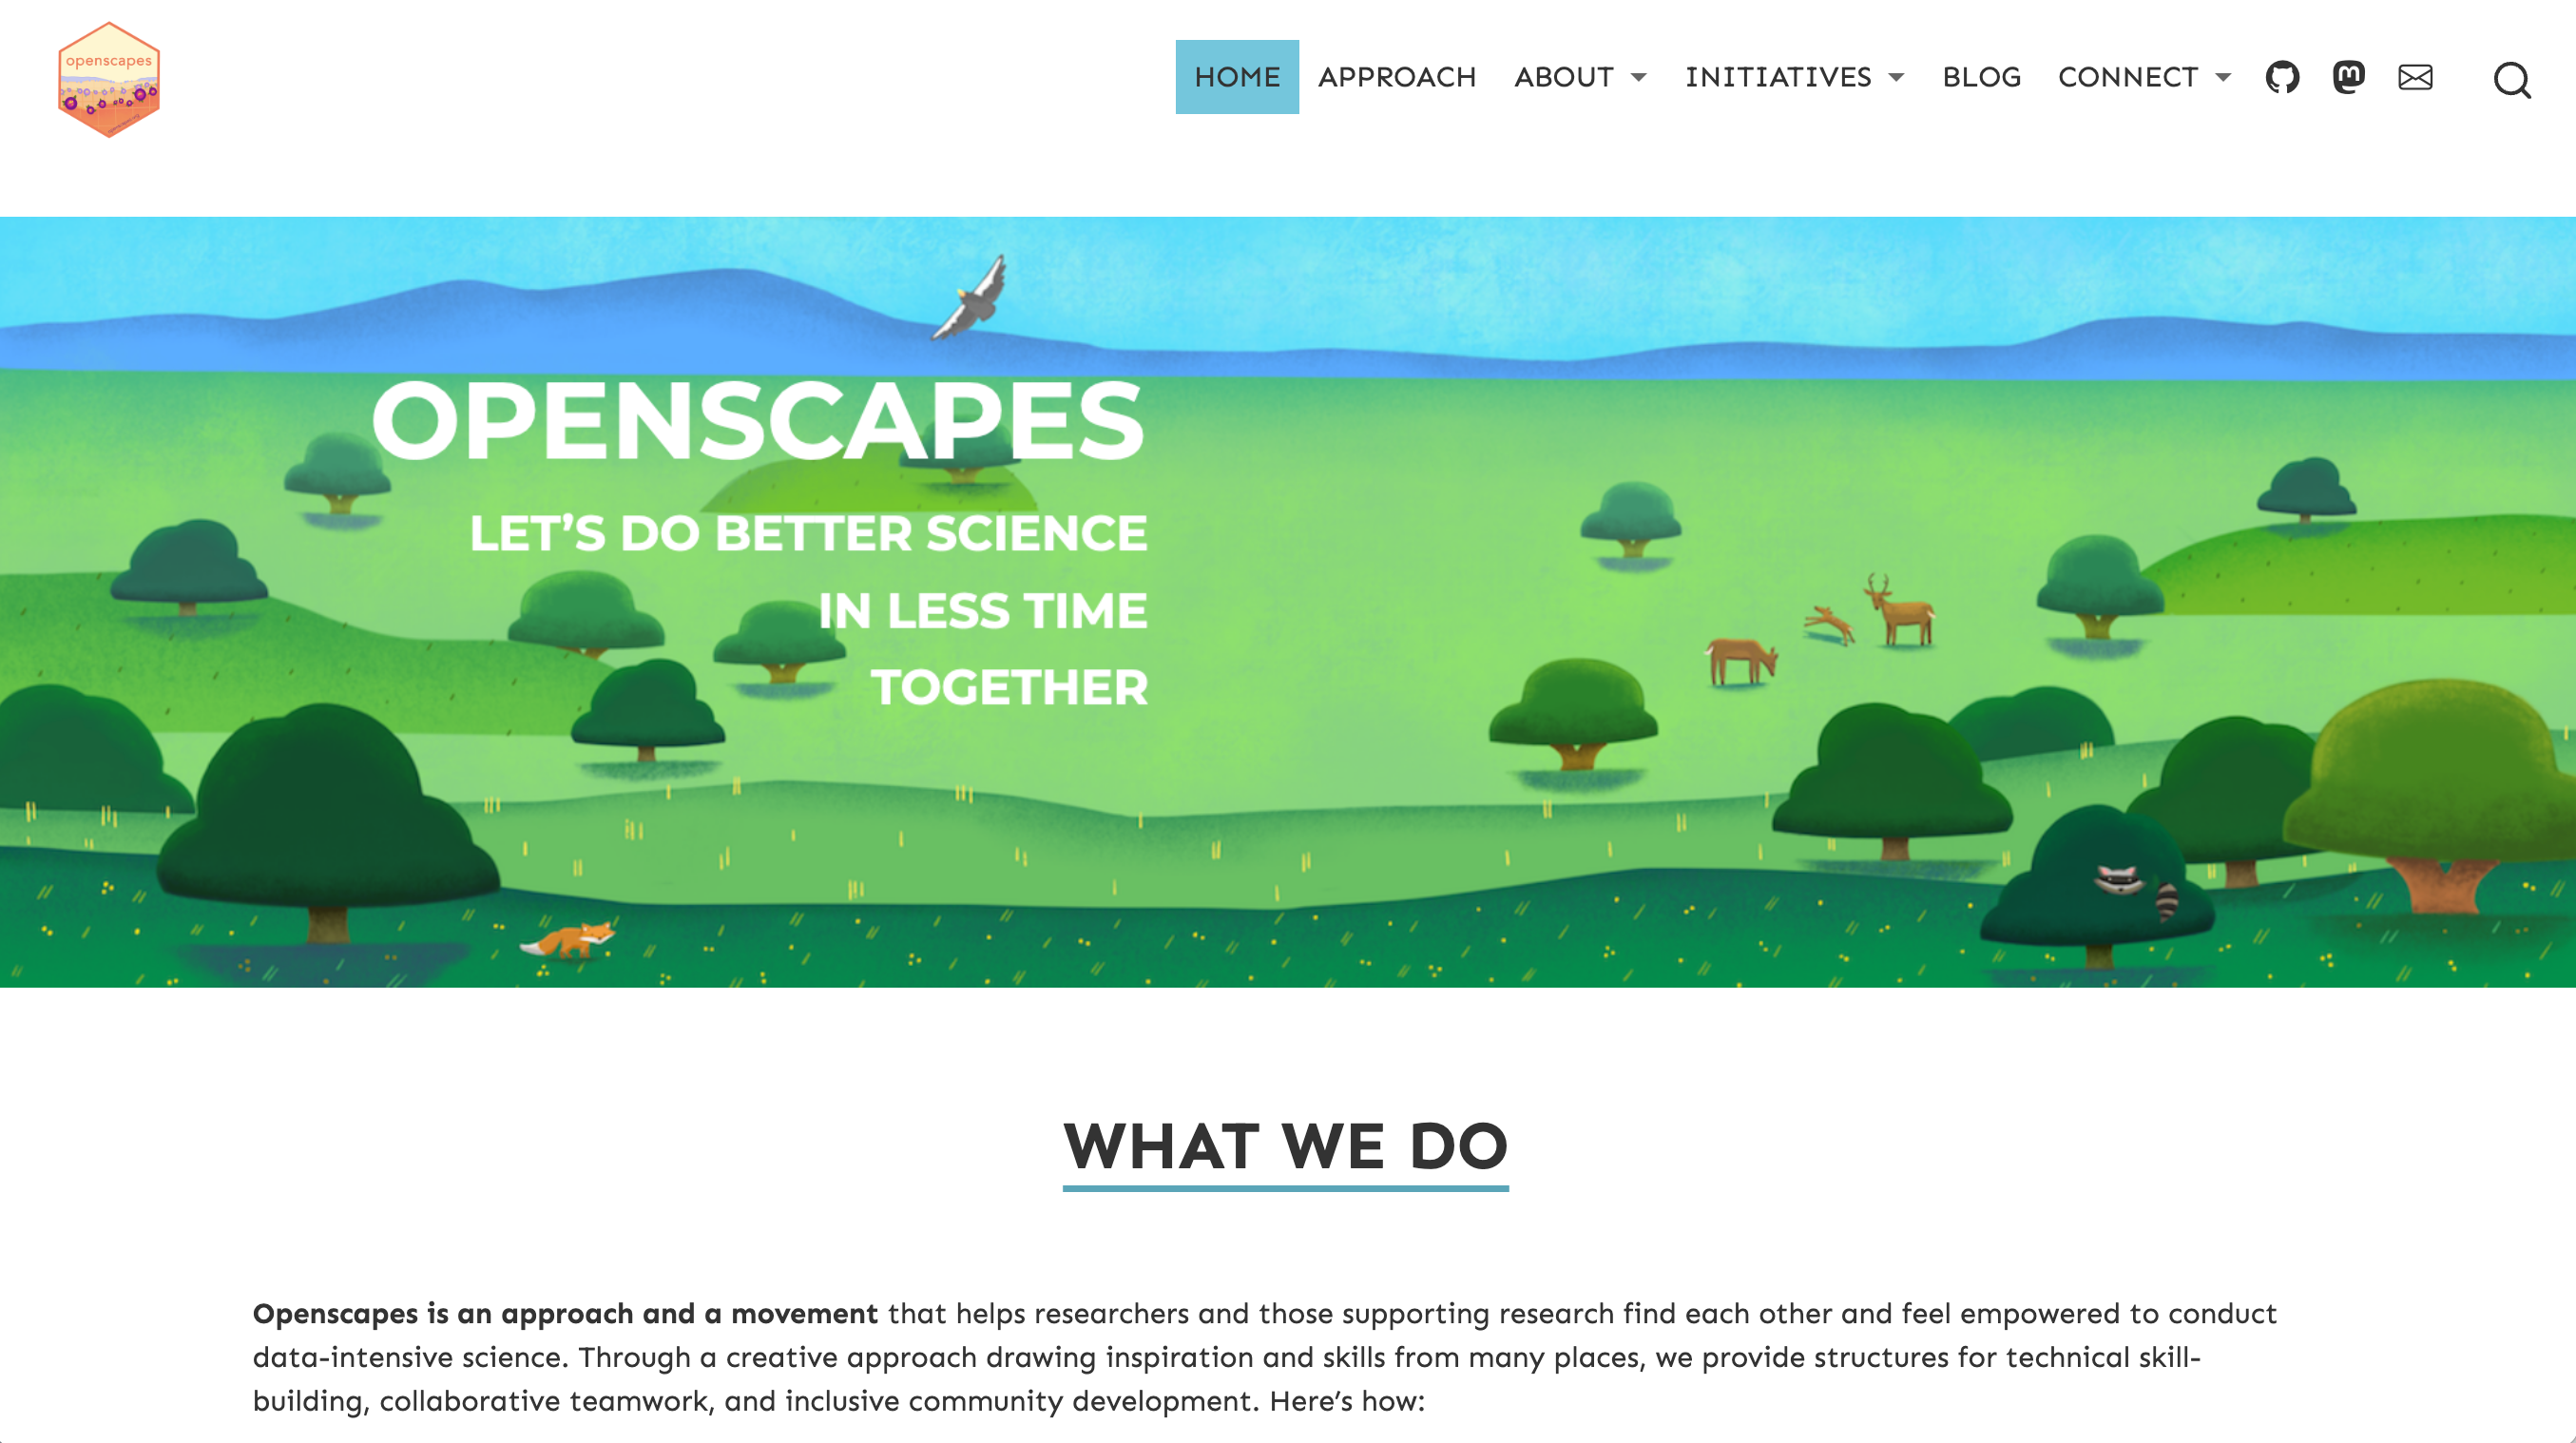 The new Openscapes website landing page, built with blogdown. A banner image reads "OPENSCAPES Let's do better science in less time together" on top of a grassy landscape drawing with trees, deer, a raccoon, and a fox. A condor soars overhead and blue mountains stretch across the background. Below the banner reads the header, "WHAT WE DO" underlined in blue